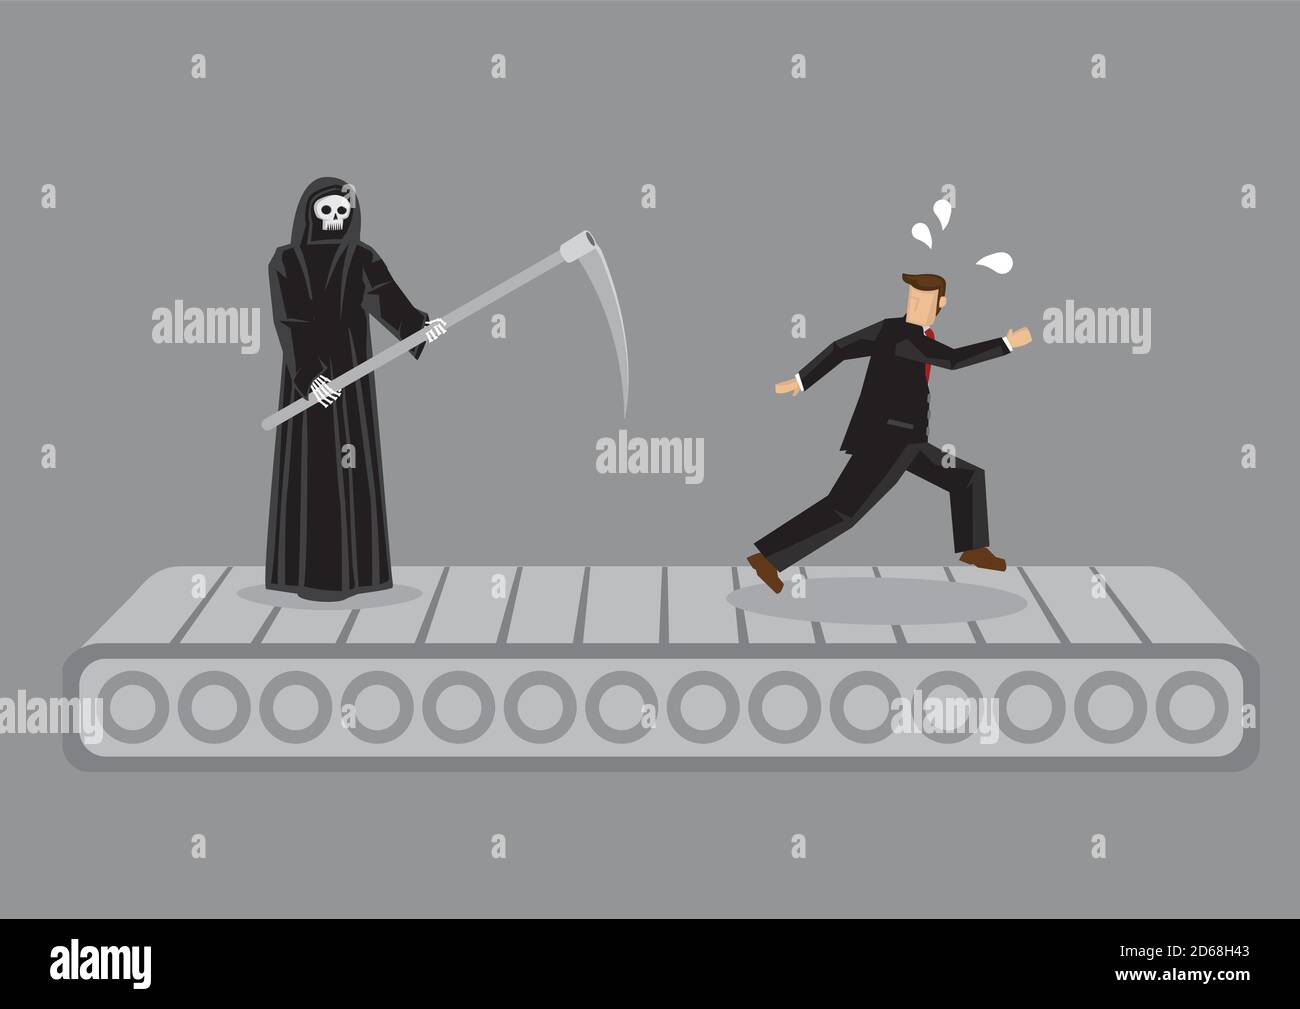 Grim Reaper and cartoon man running on treadmill. Creative vector illustration on futile effort to escape death metaphor isolated on grey background. Stock Vector